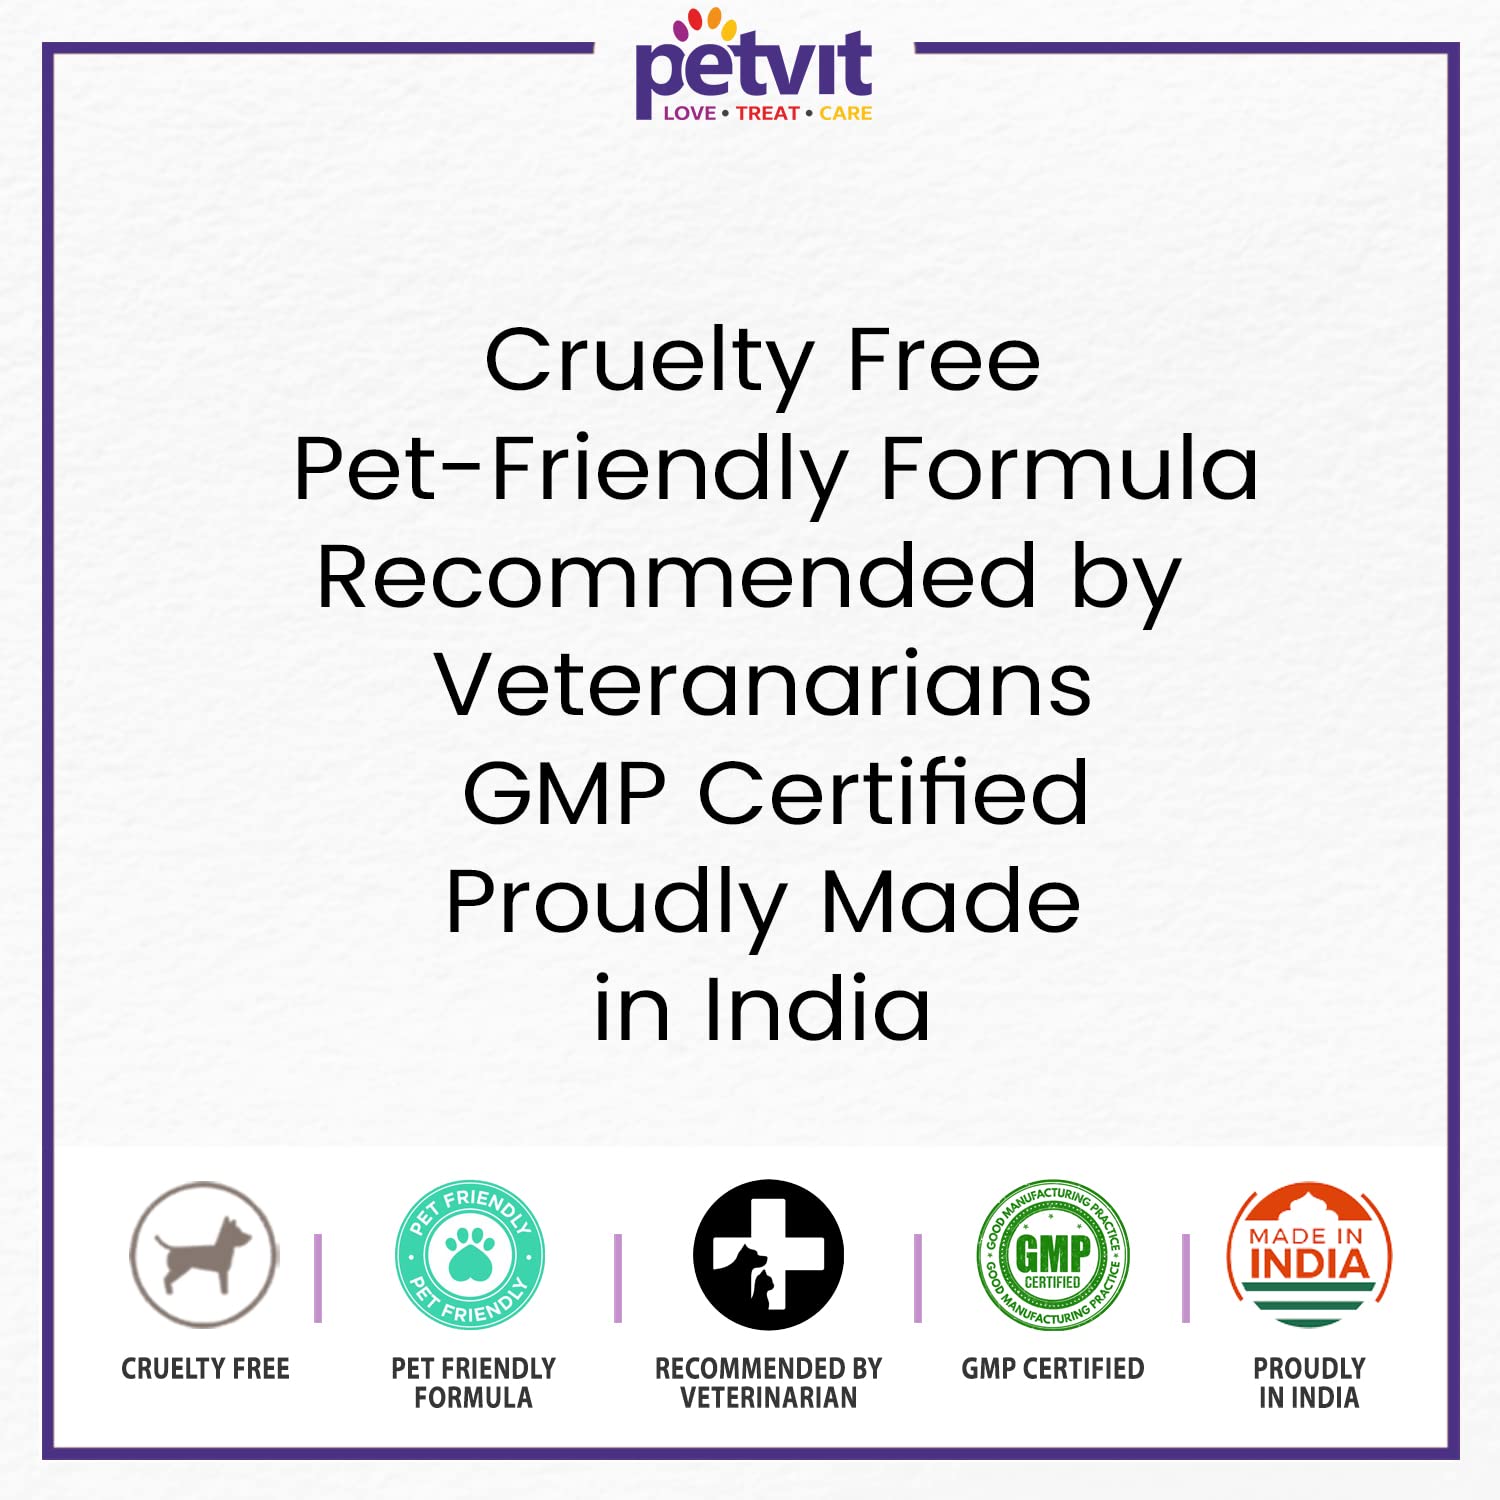 Petvit Hematic Syrup with Iron as Ferrous Sulphate, Zinc, Copper, Selenium, Vitamin B12 | Prevents Iron & Nutritional Deficiency Anemia | Chicken Flavor | for All Ages Breed Dogs & Cats – 200ml